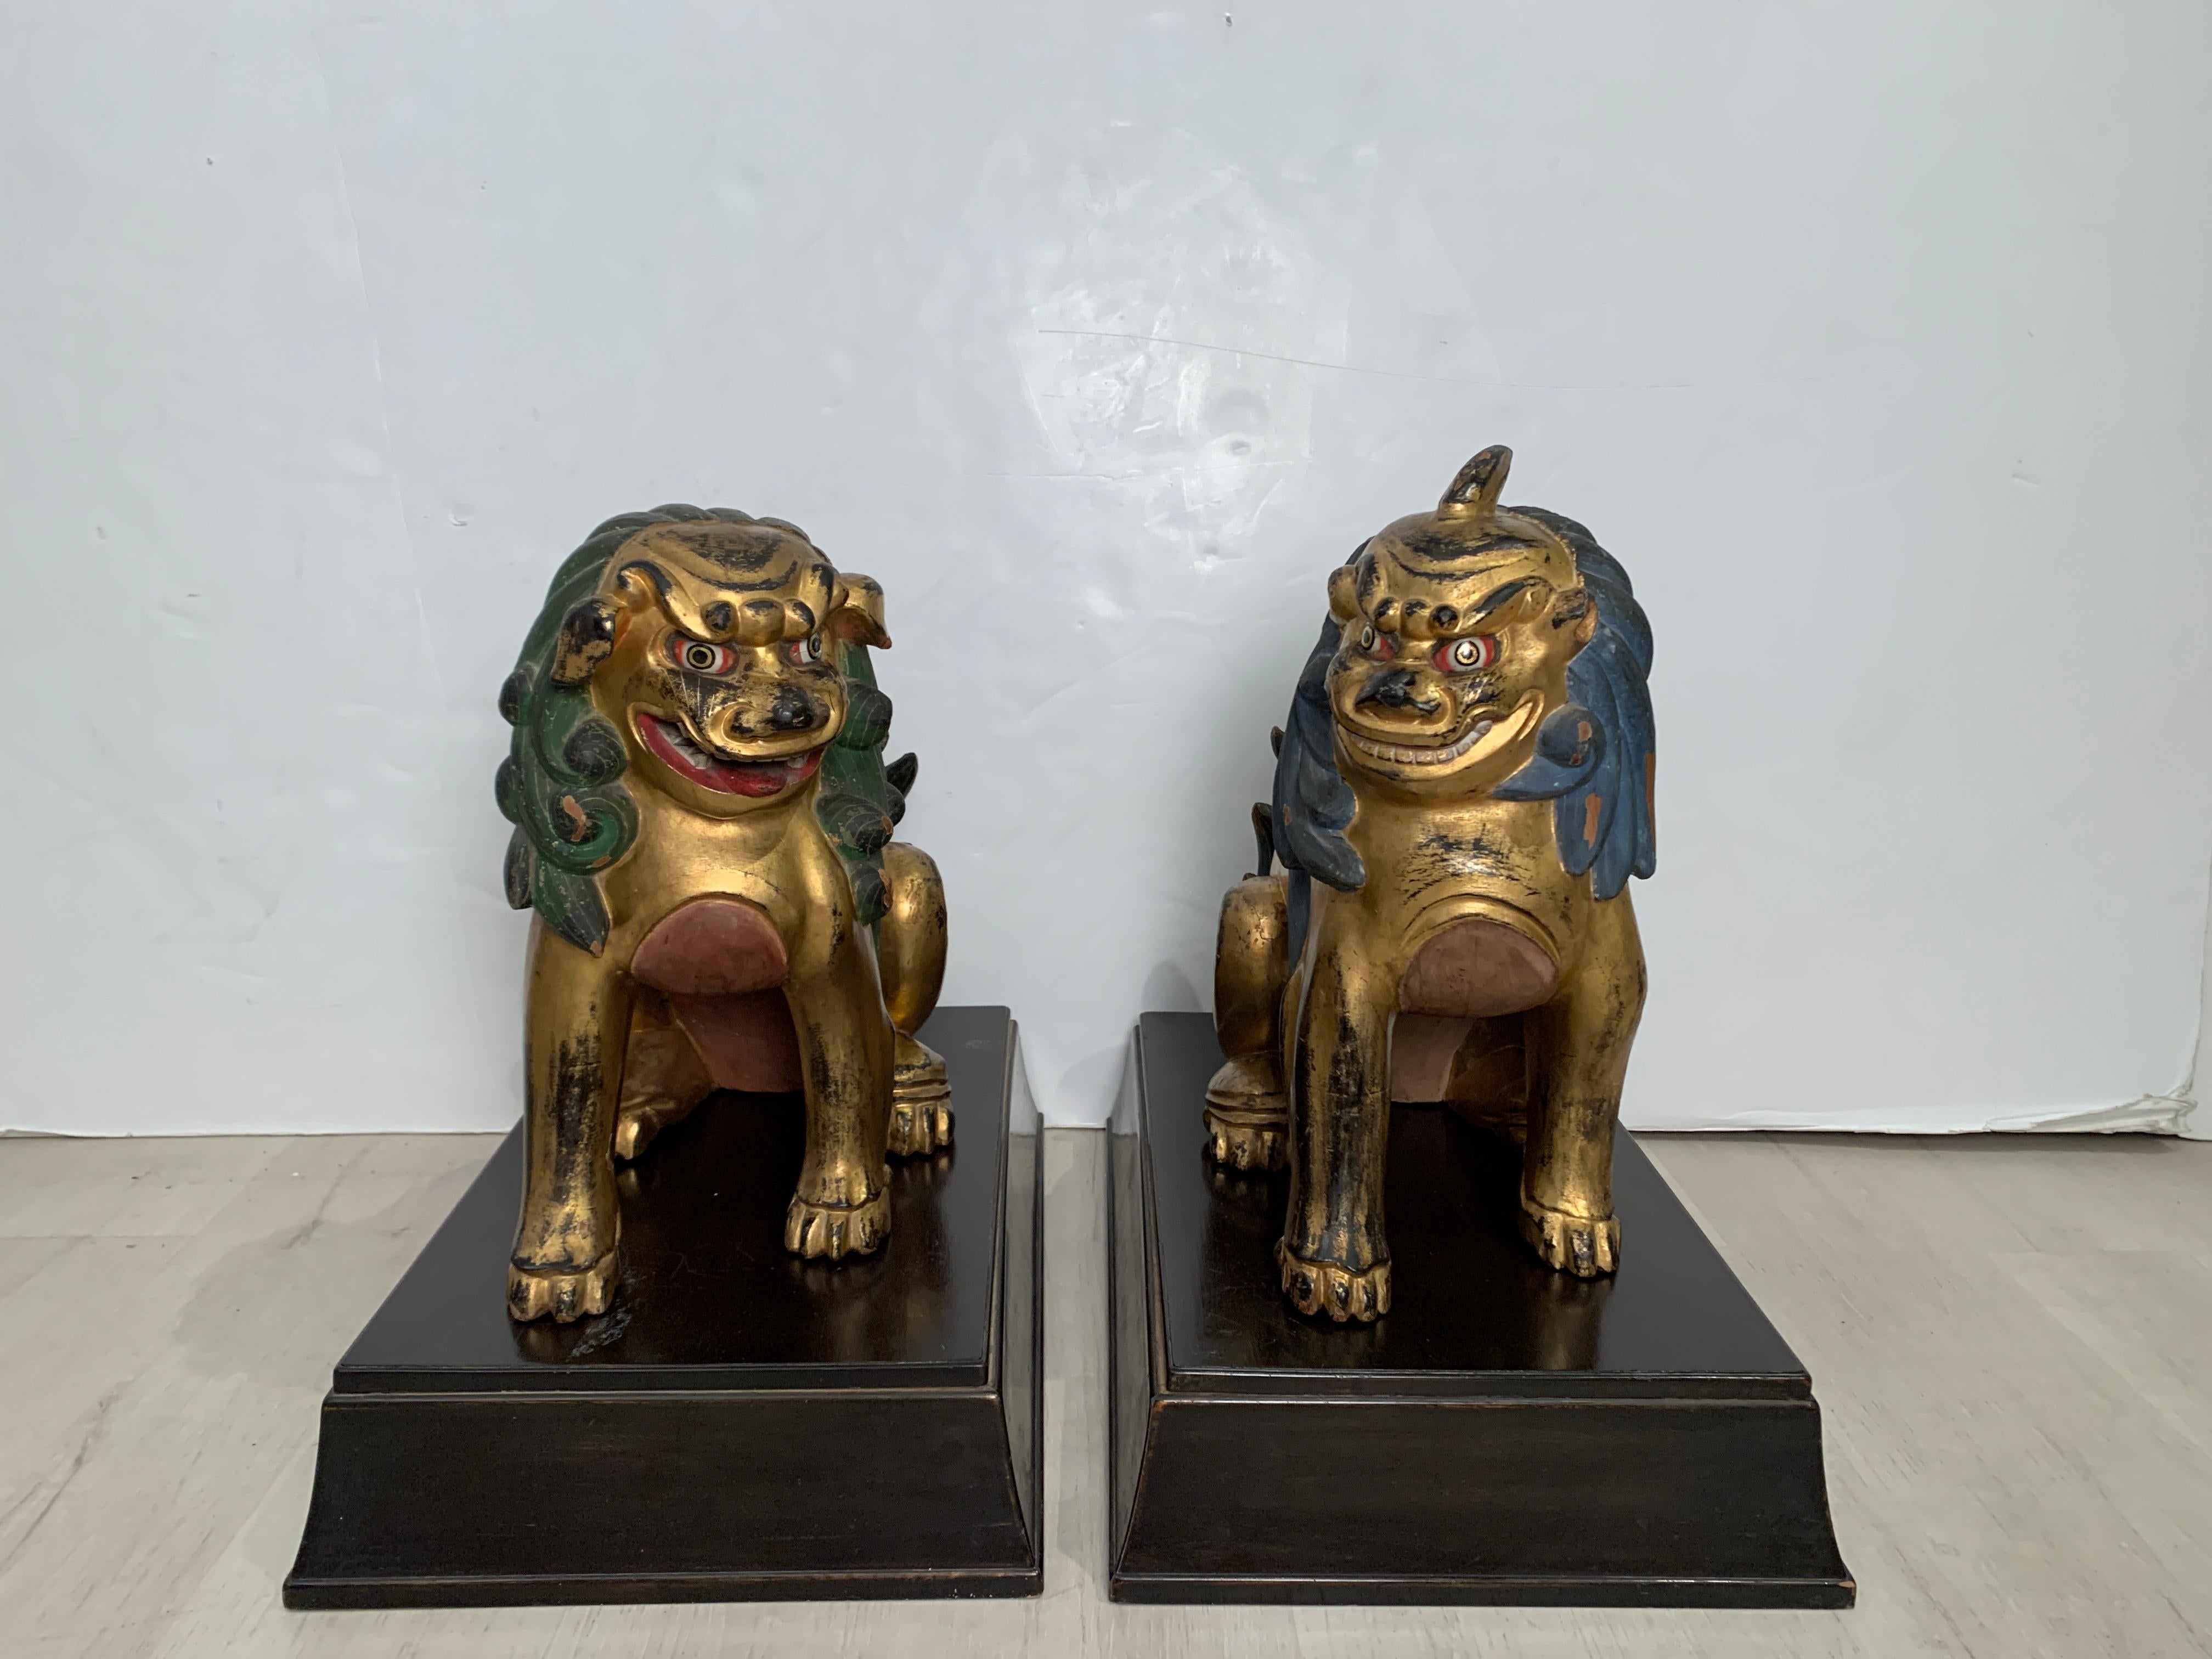 A charming and mischievous pair of Japanese carved, gilt and painted komainu, often mistaken for foo dogs or foo lions, Showa Period, 1920's, Japan. 

The two komainu, or guardian lions, are portrayed seated upon their haunches, heads slightly